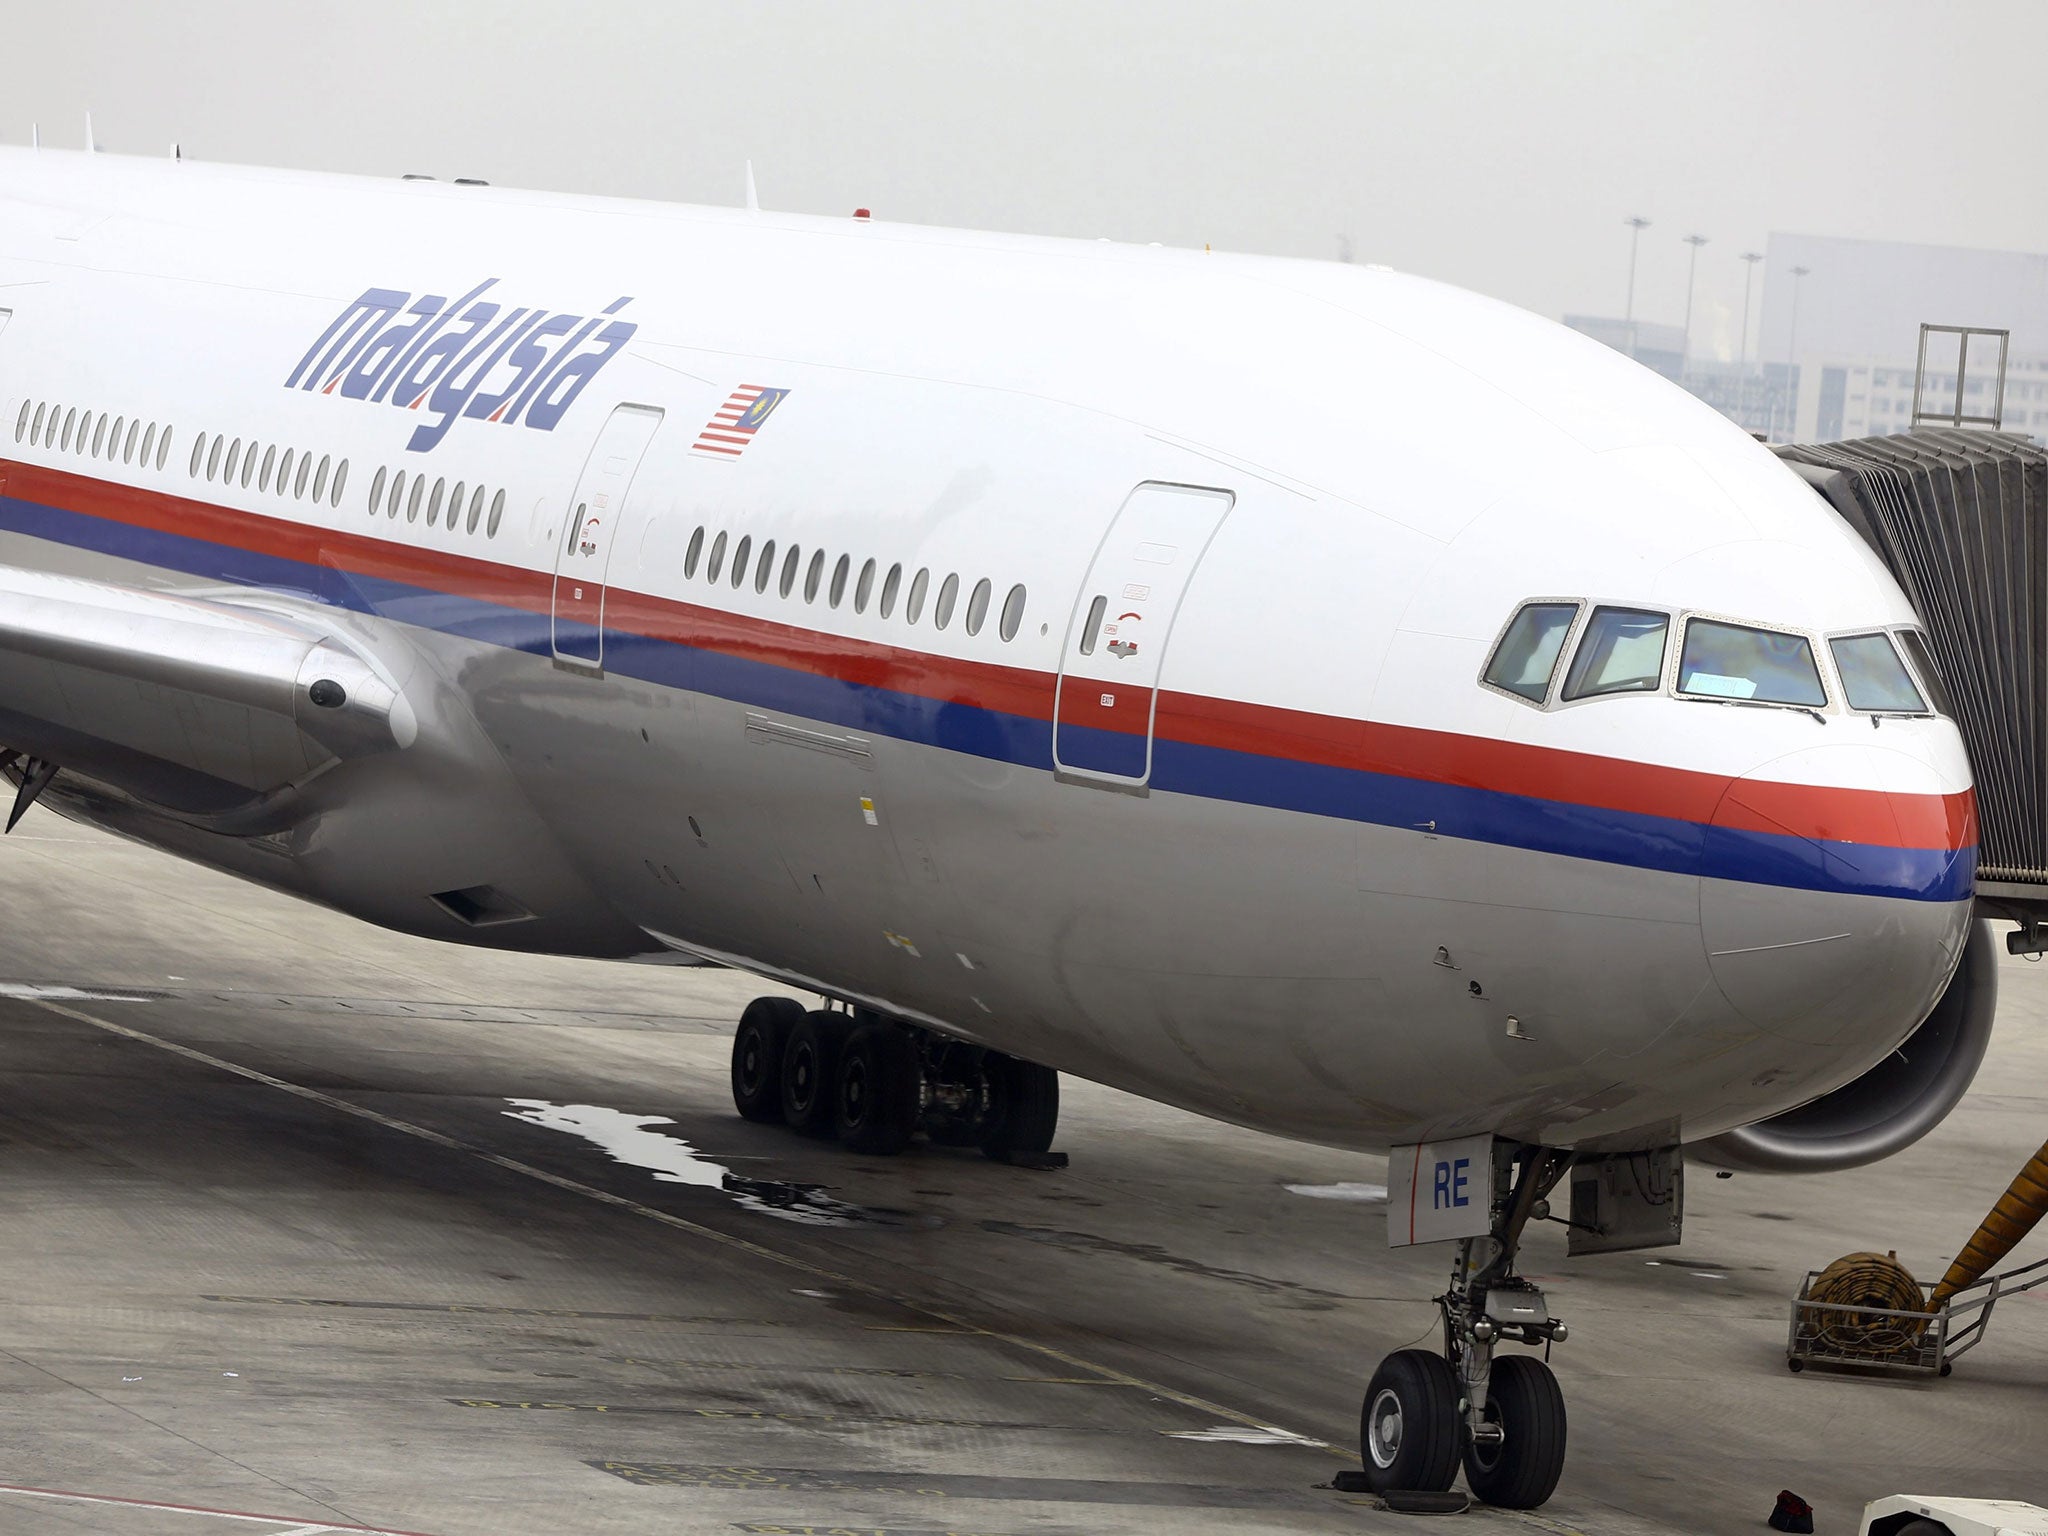 Even before the crash, Malaysia Airlines was a business in crisis